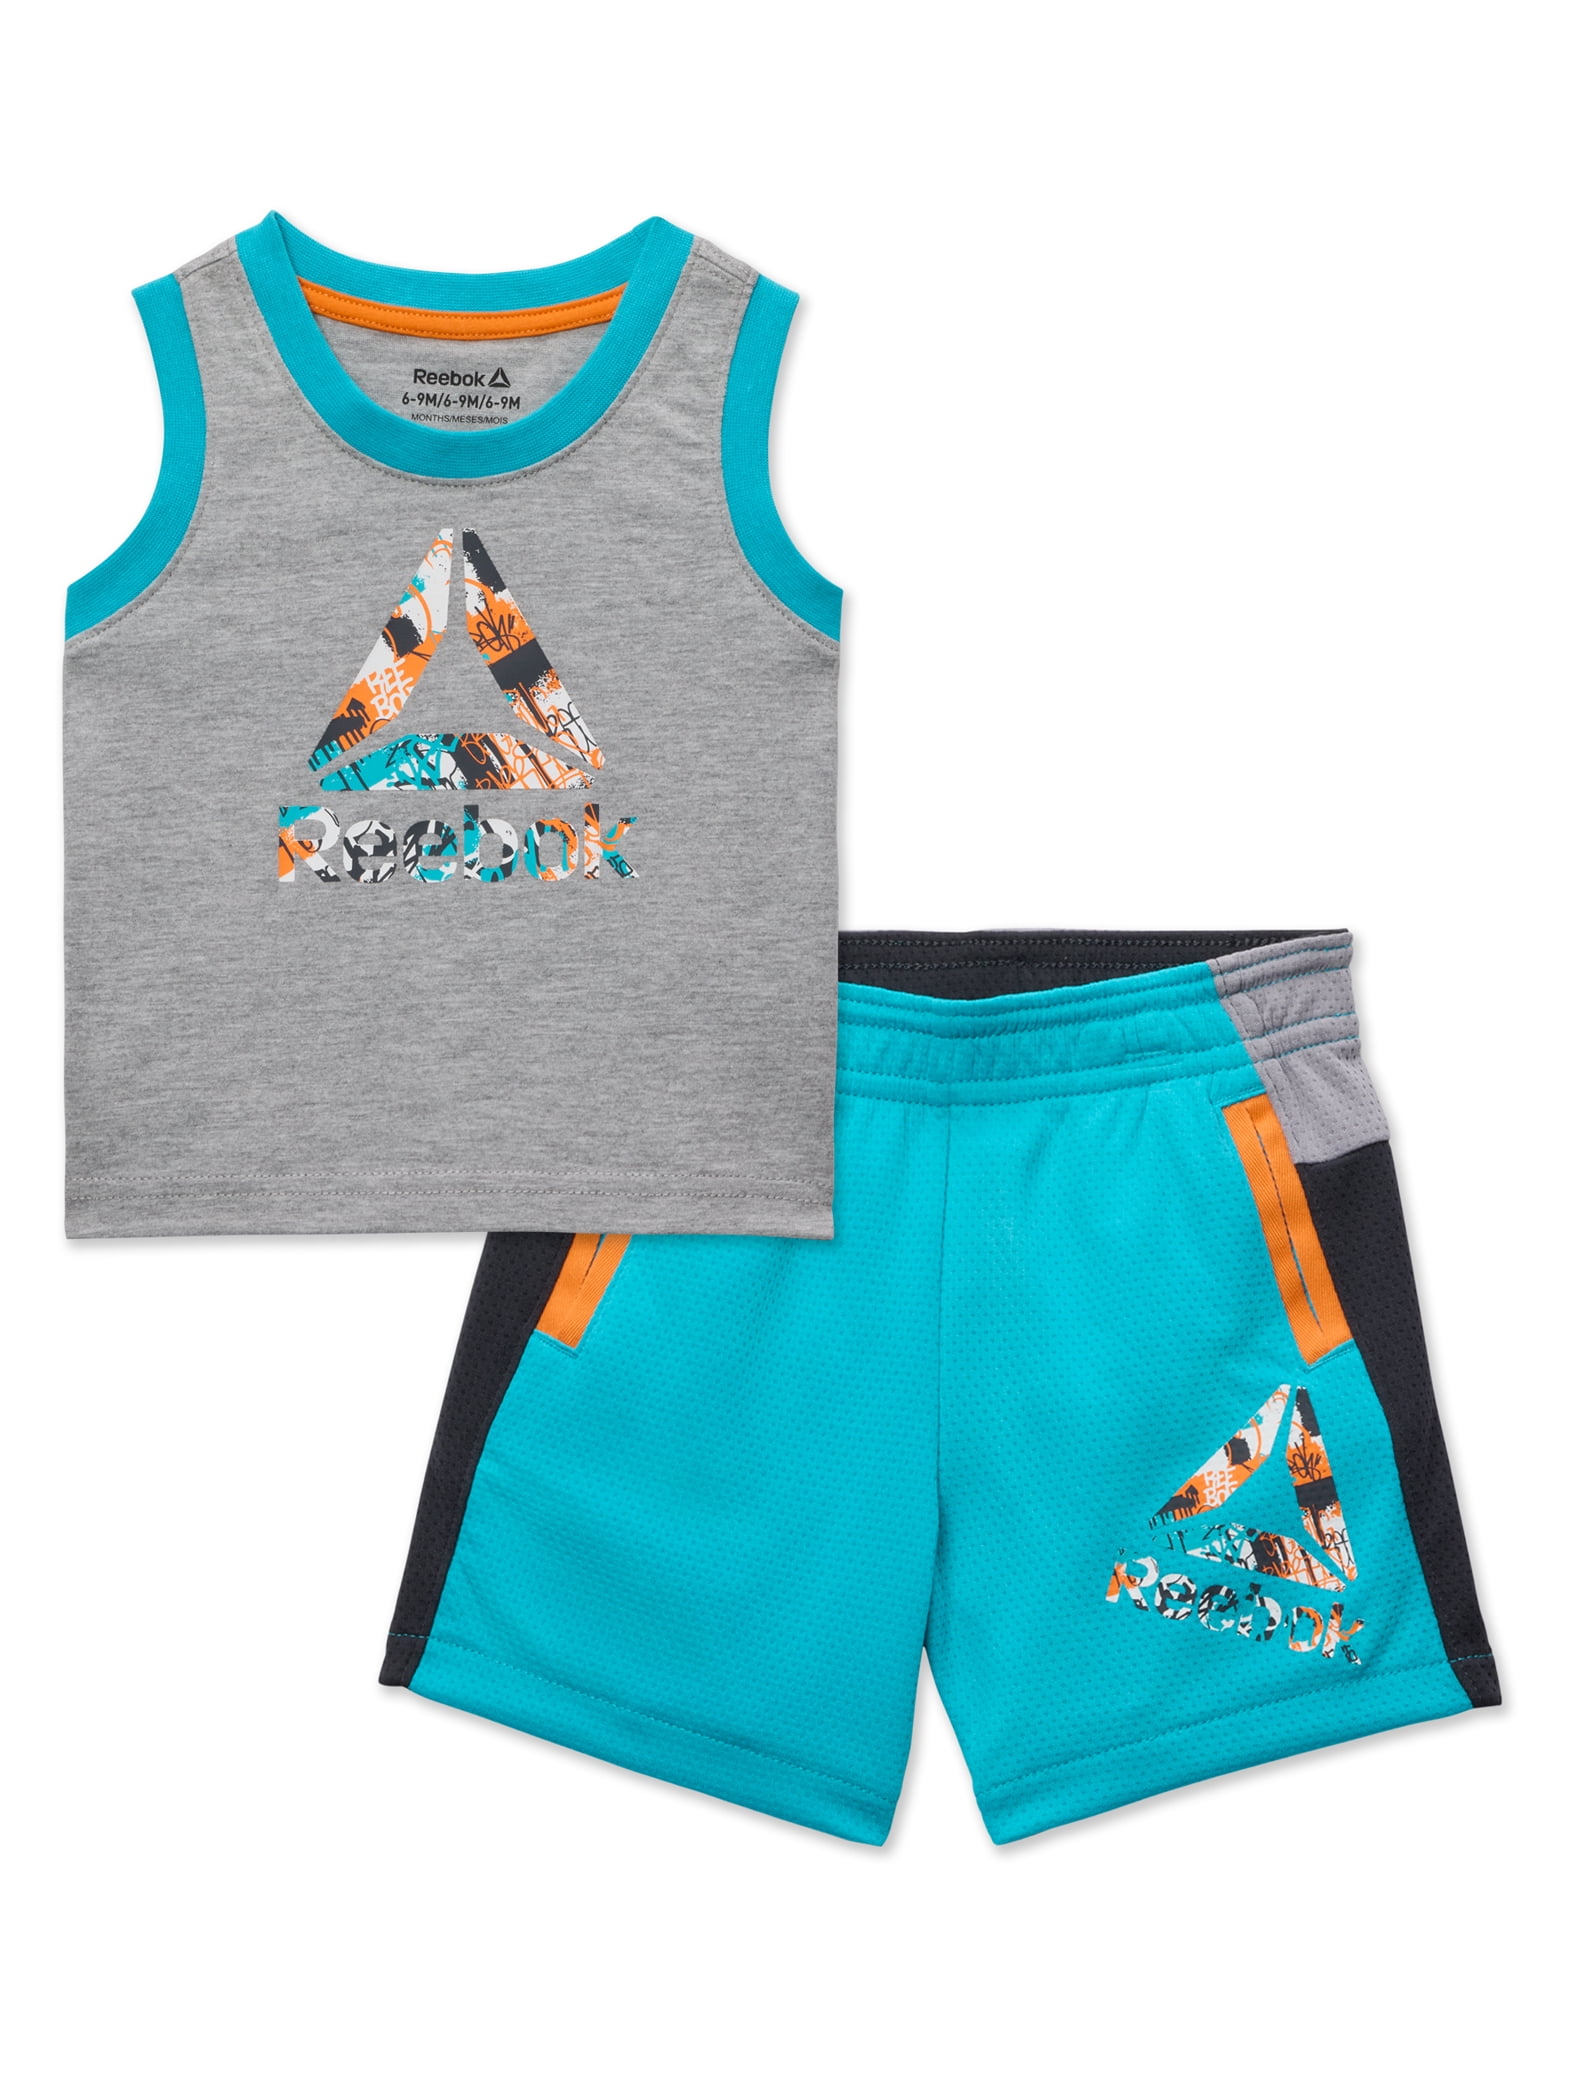 Reebok Baby Boy Short Sleeve T-Shirt and Shorts, 2-Piece Outfit